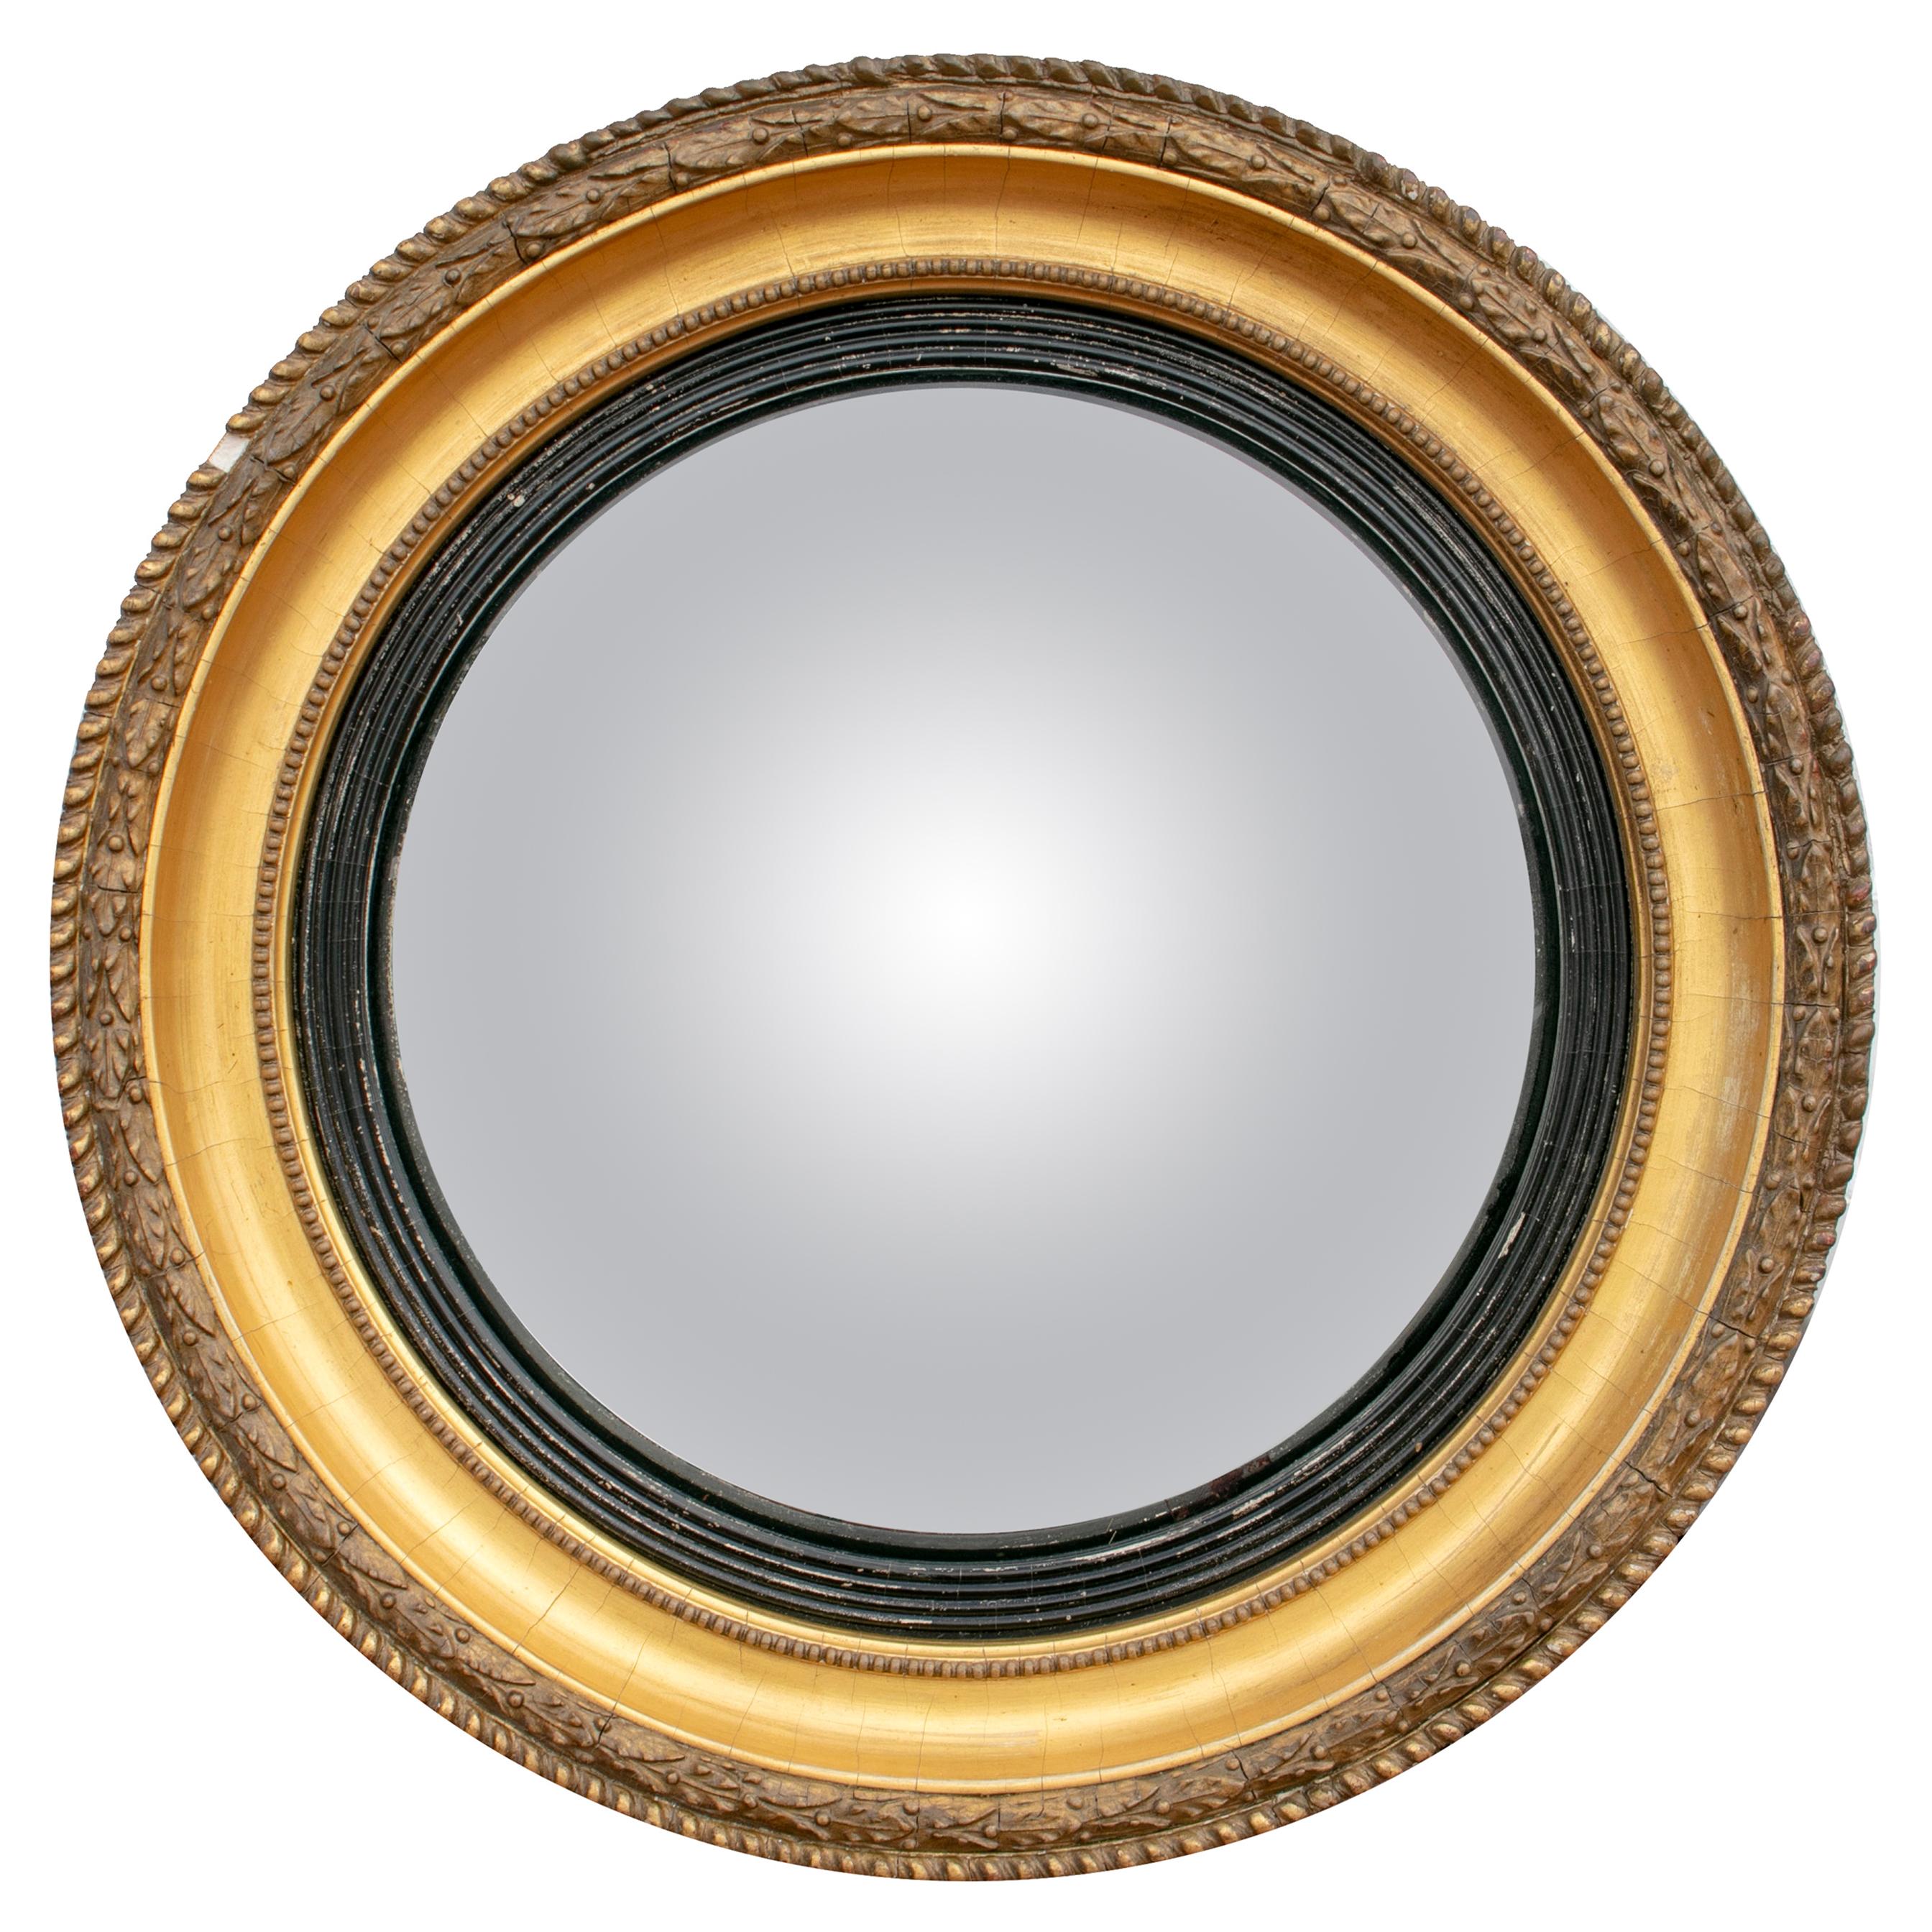 19th Century French Convex Round Mirror with Gilt Frame